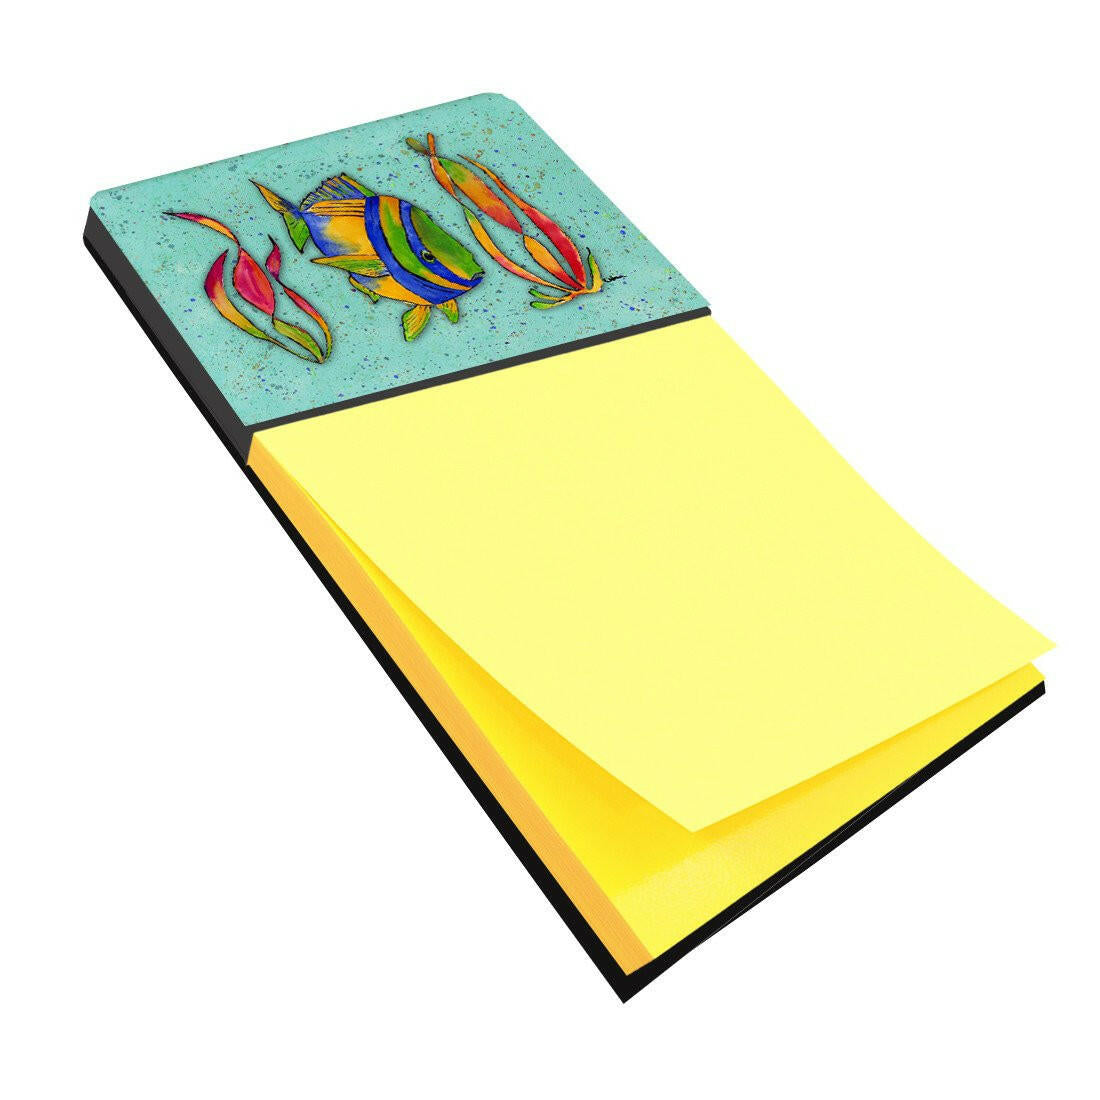 Tropical Fish on Teal Refiillable Sticky Note Holder or Postit Note Dispenser 8569SN by Caroline's Treasures